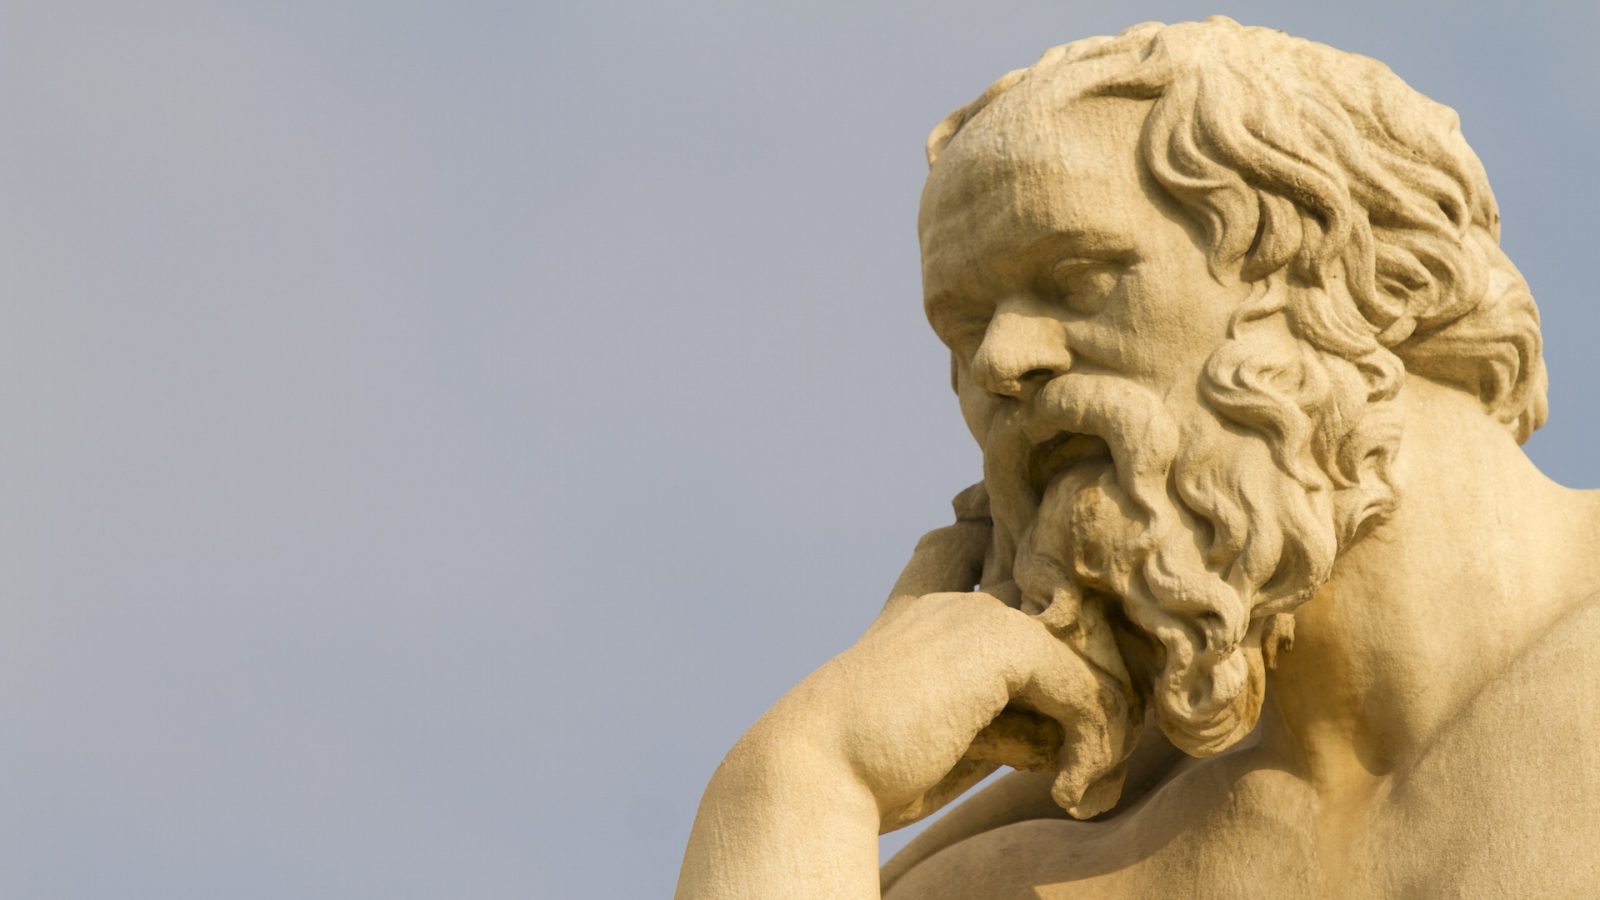 Can You Pass This Basic Middle School History Test? Socrates2.1920x0